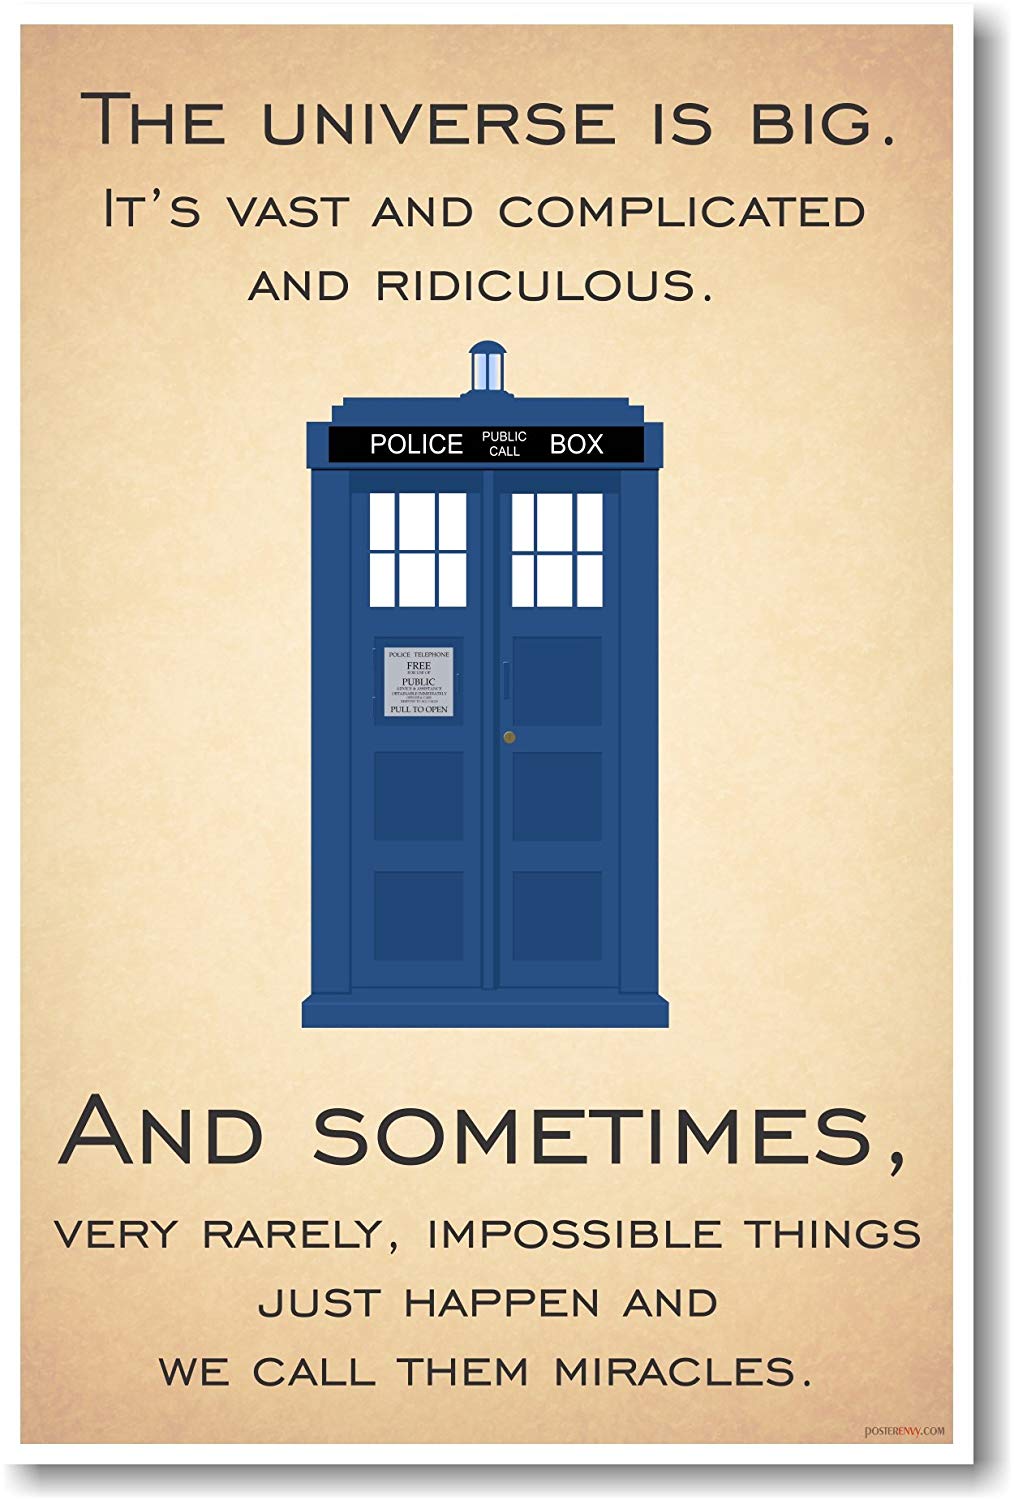 Doctor Who - Tardis - The Universe Is Big  The Universe Is Big. It's Vast And Complicated And Ridiculous.